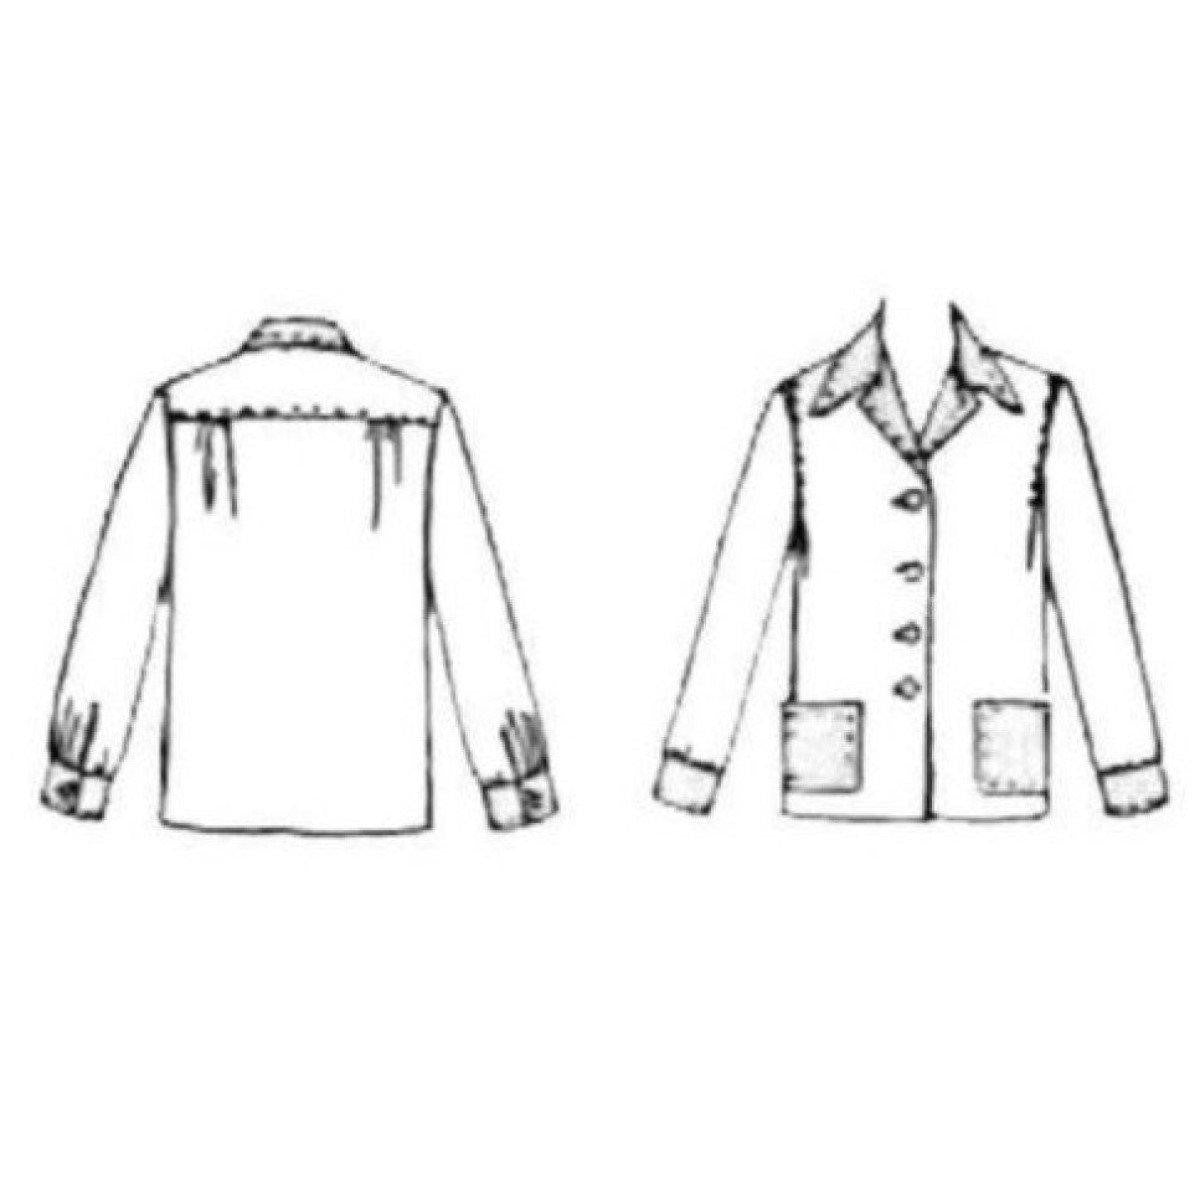 Line drawing of jacket